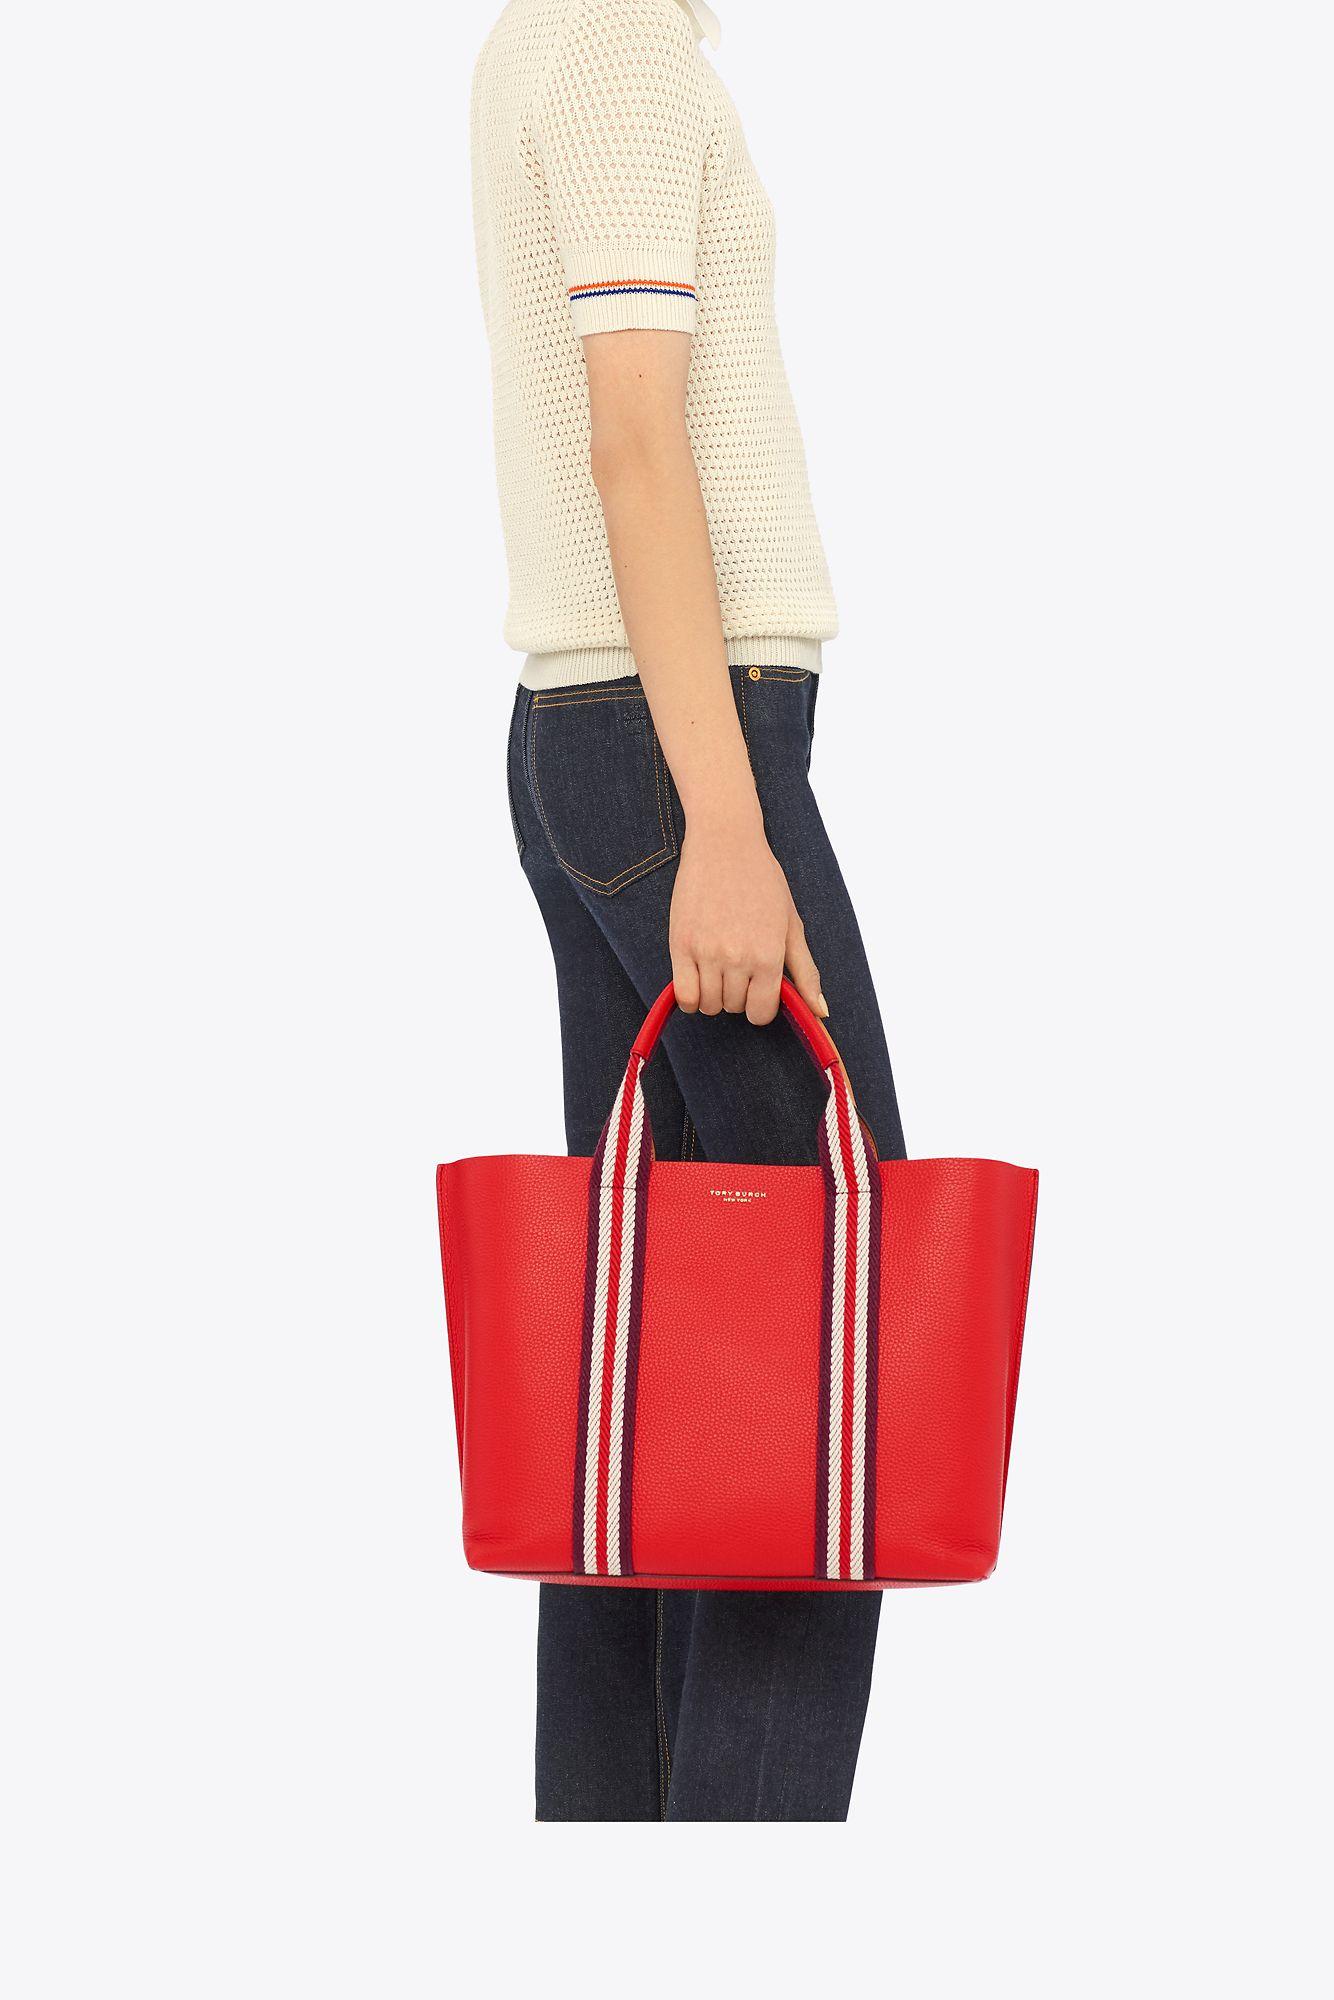 Tory Burch Leather Perry Multi-stripe Triple-compartment Tote in Red - Lyst